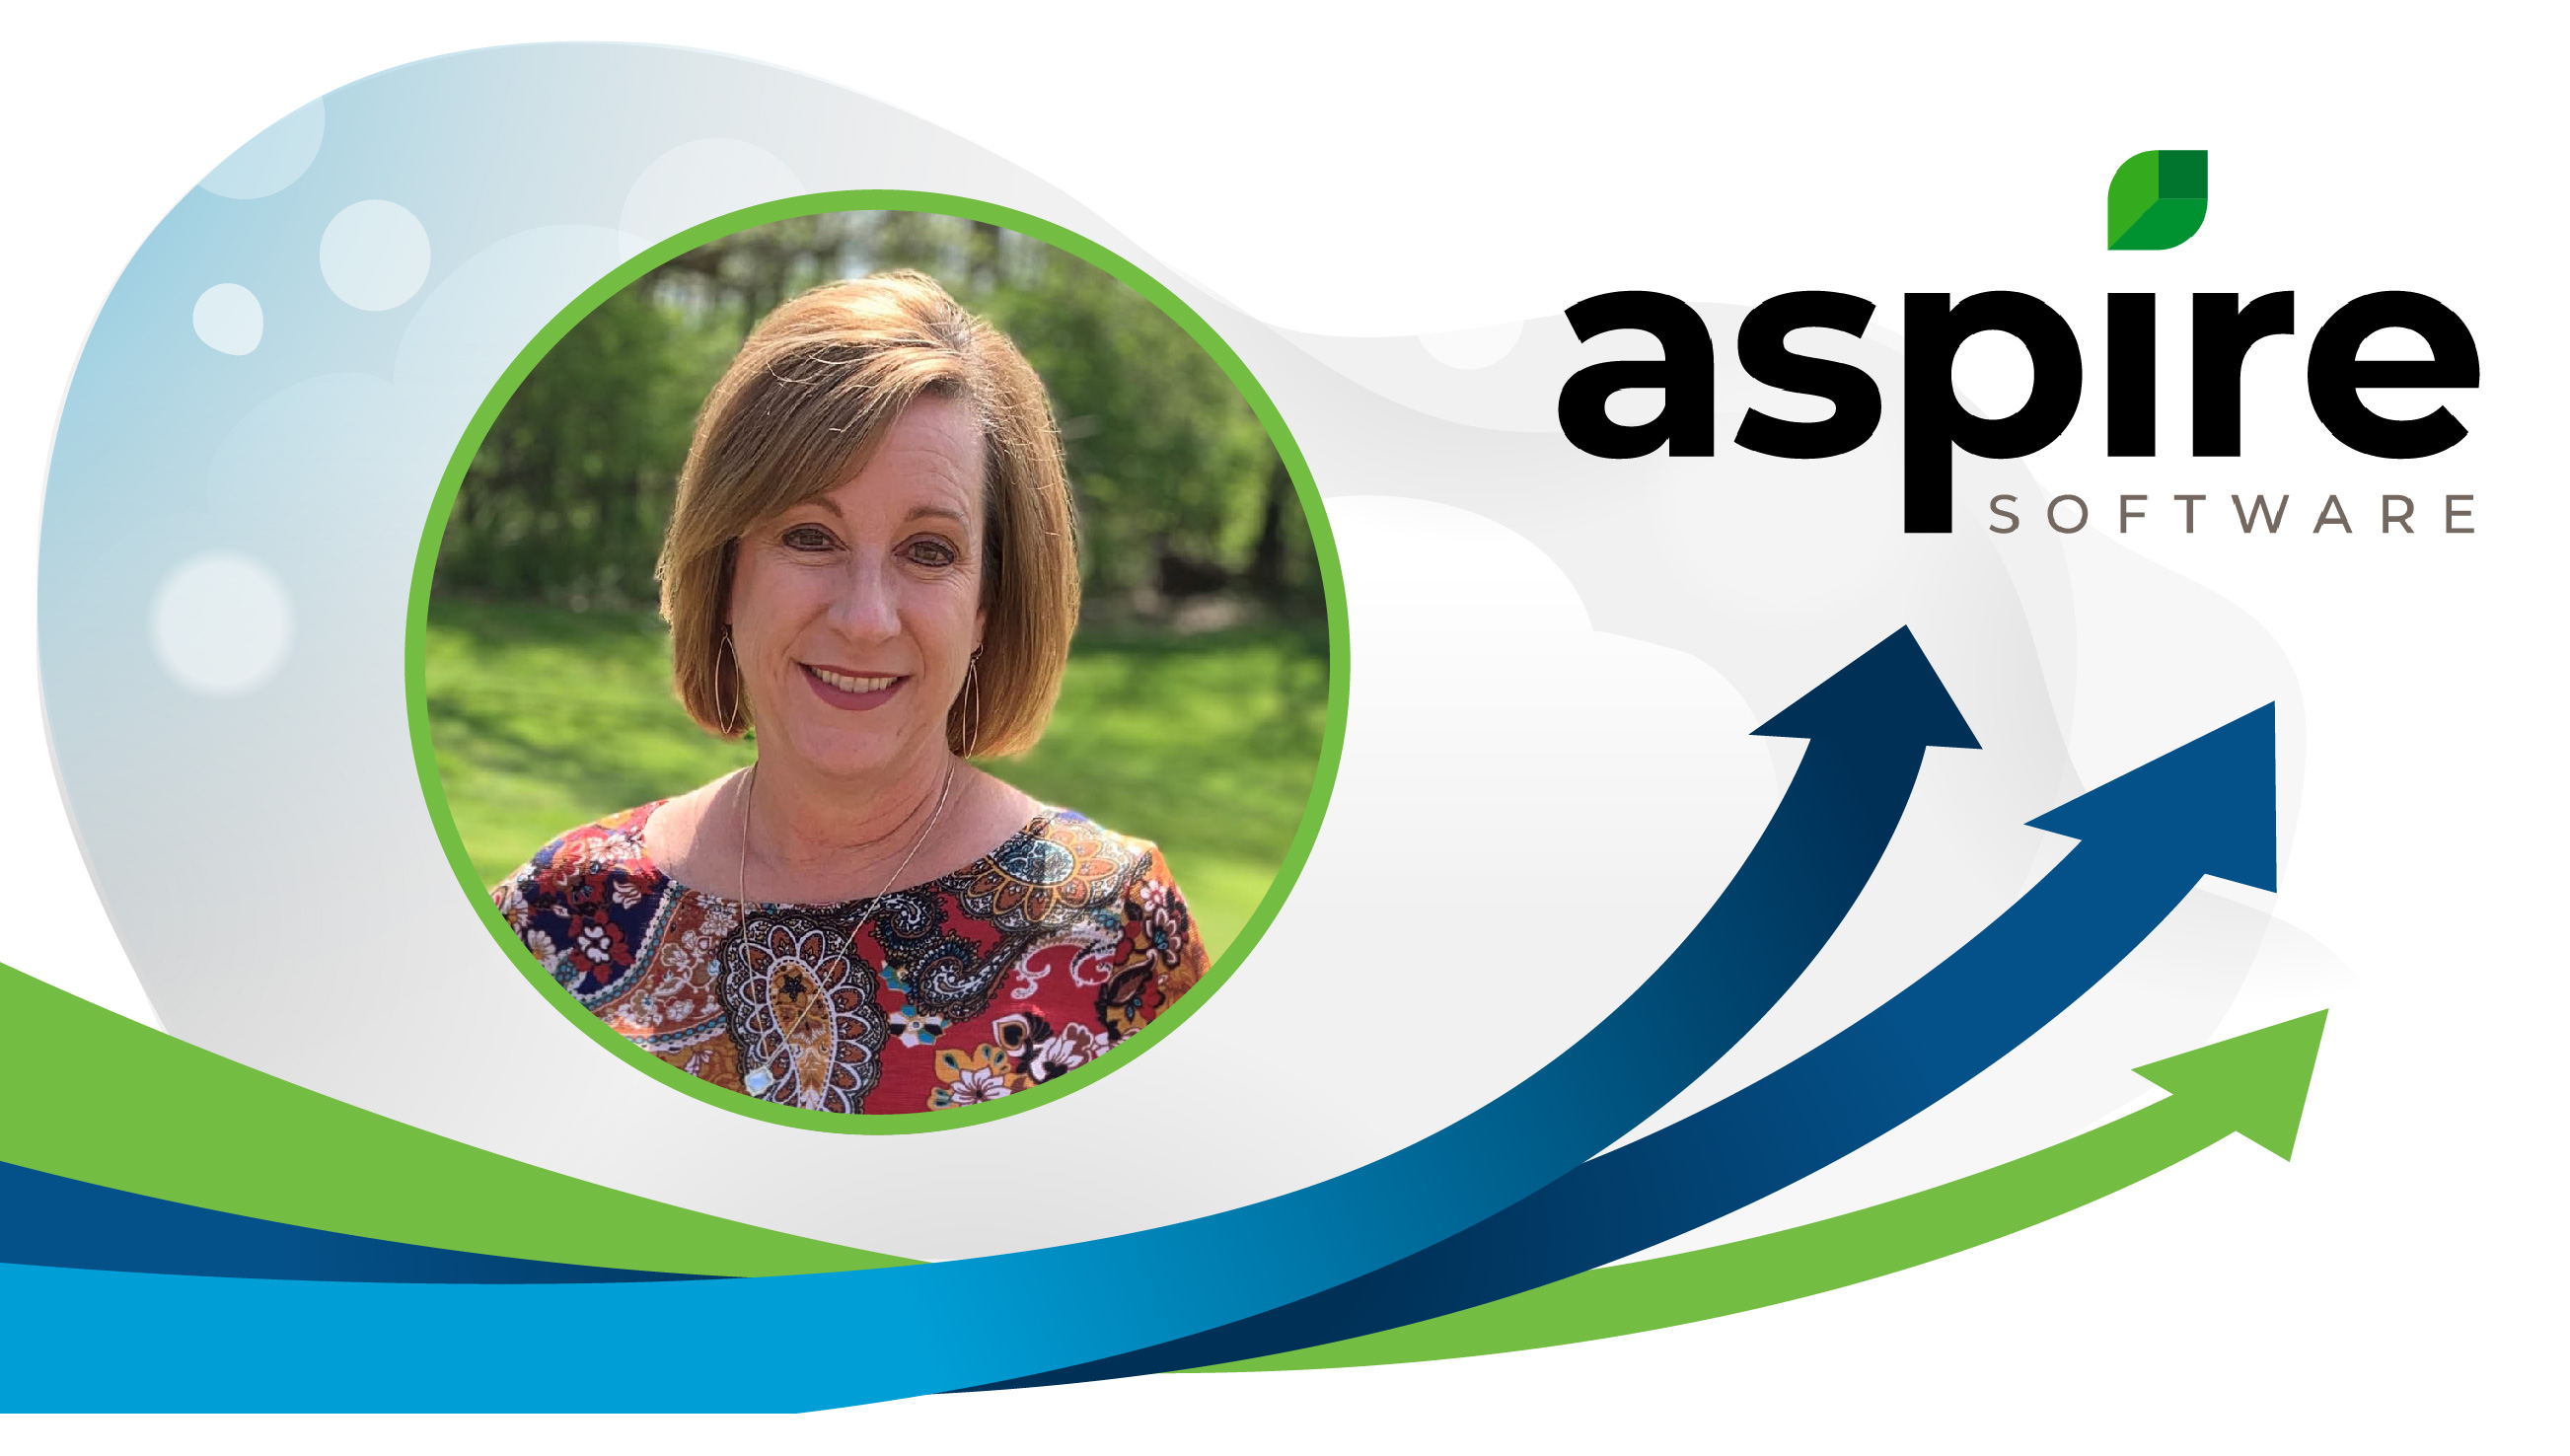 Janet Brennan Joins Aspire Software as Vice President of People